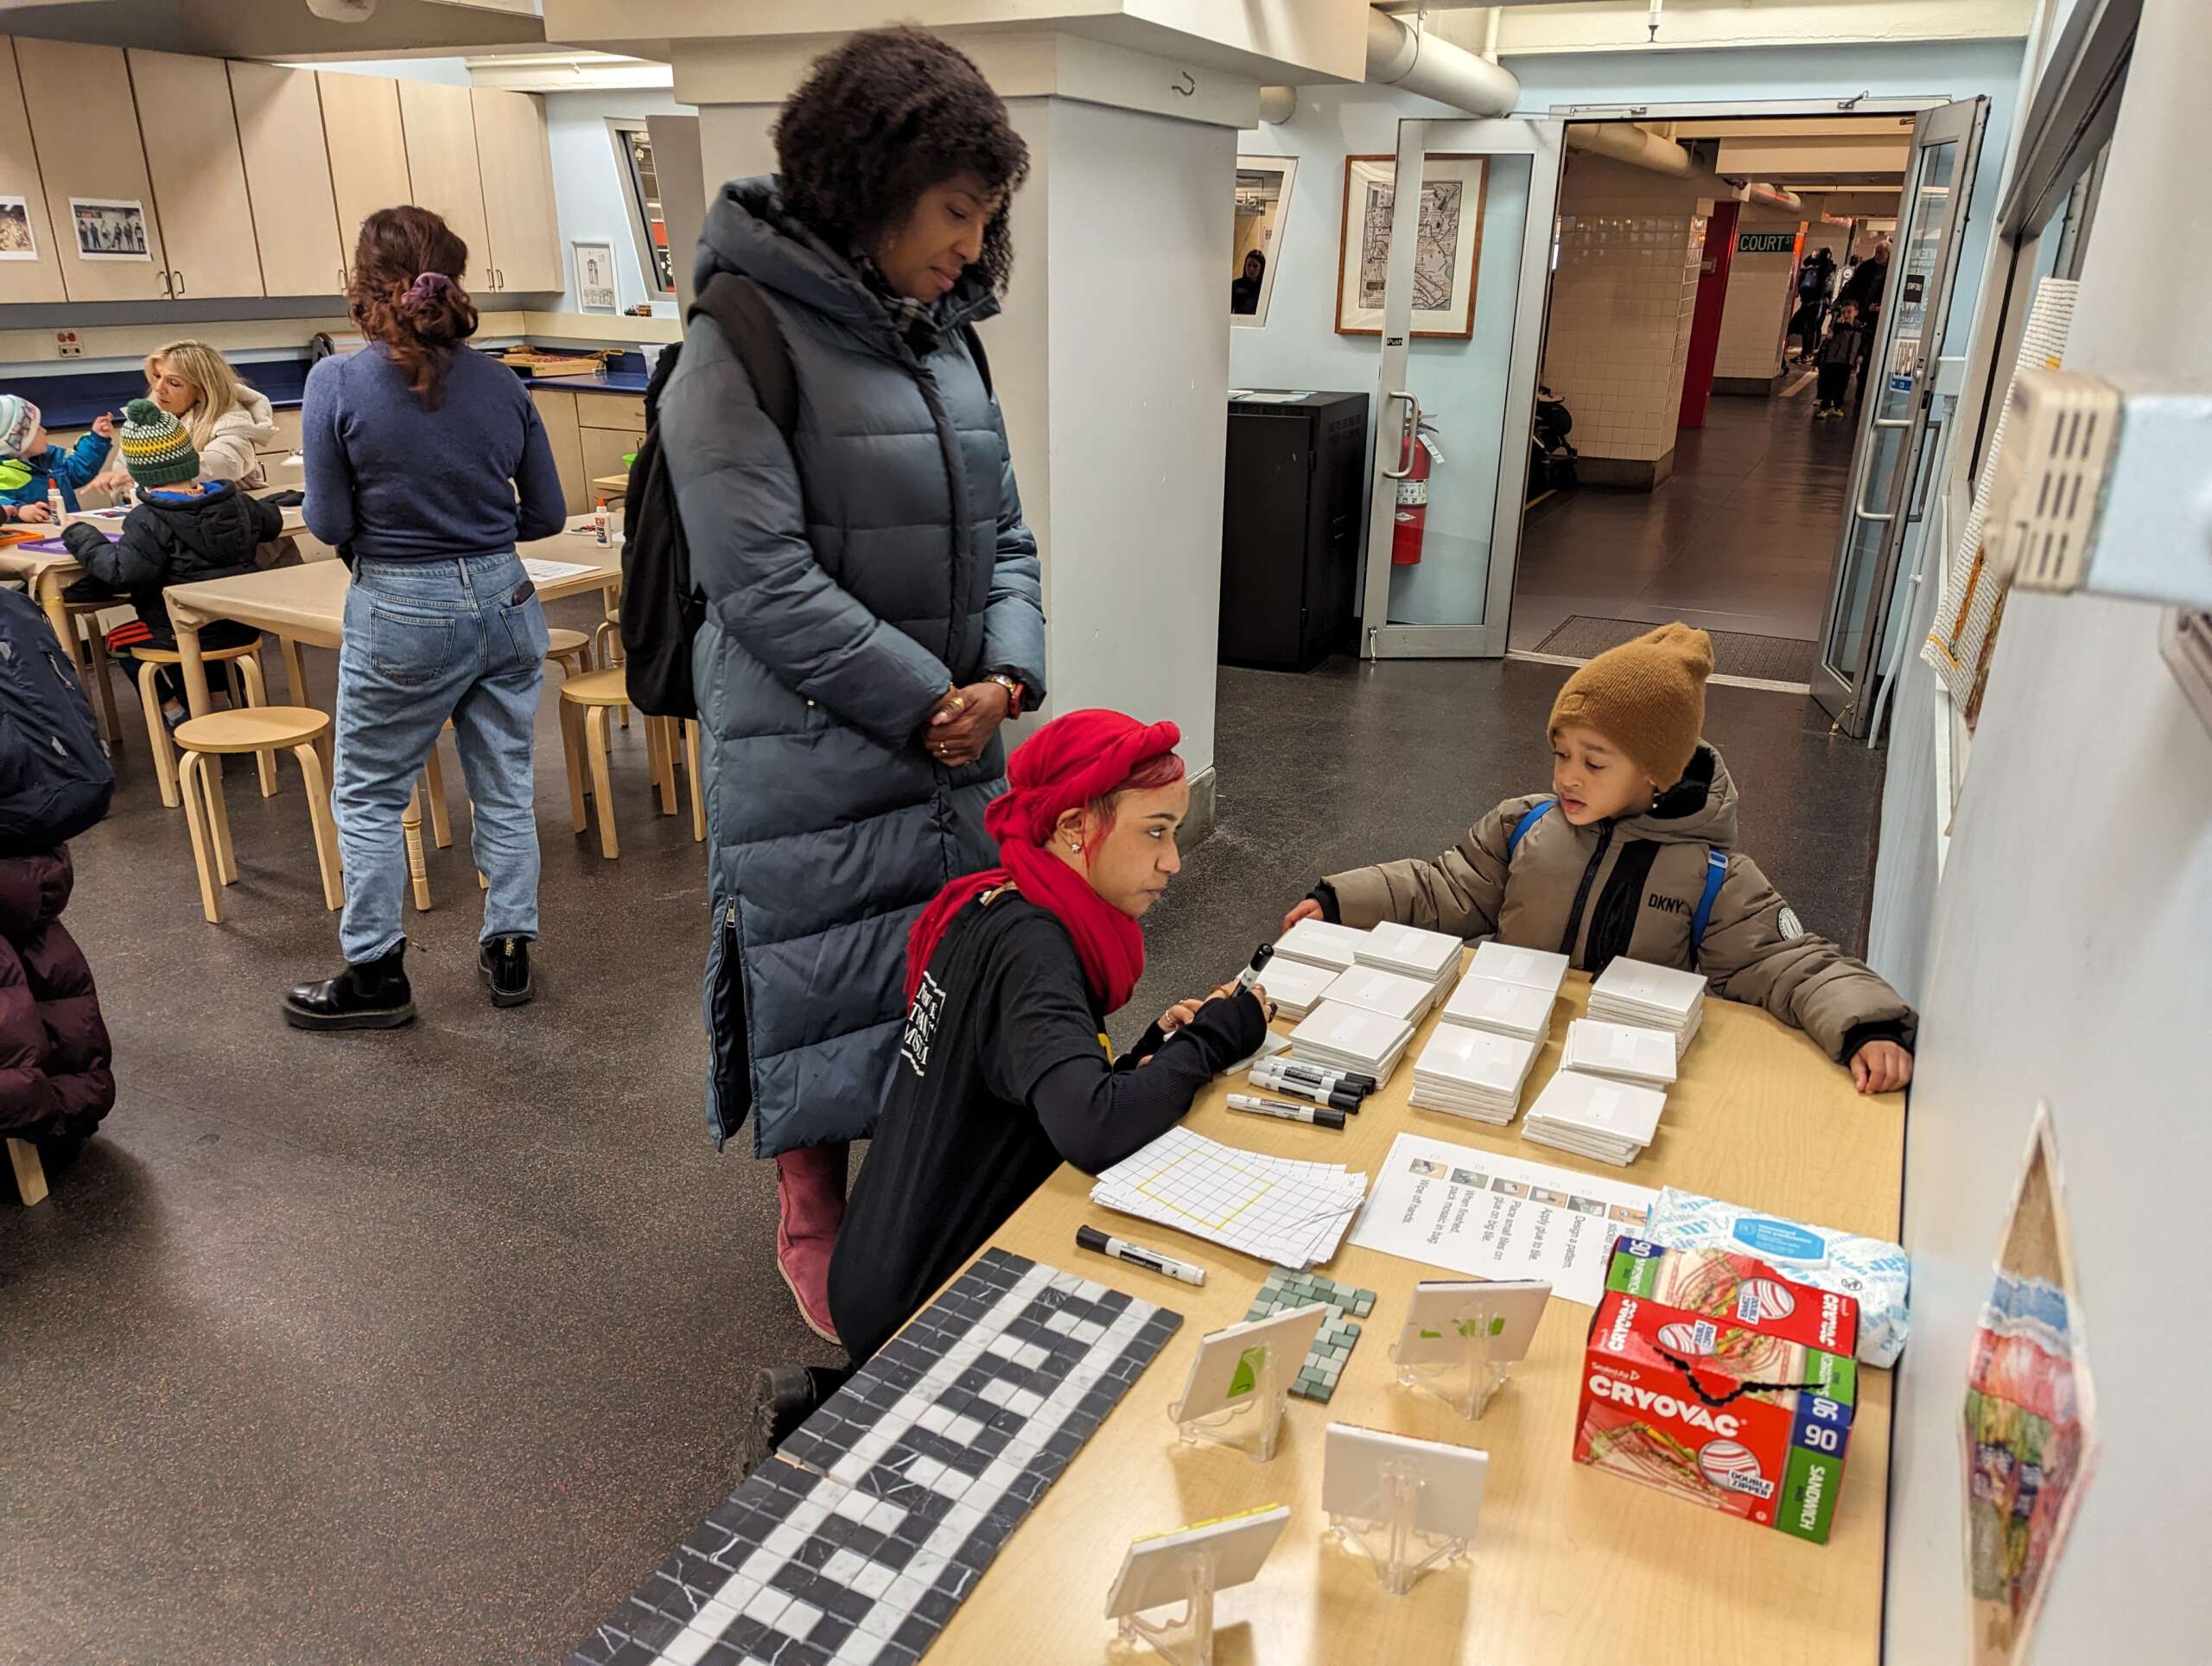 An adult and child talking to a Museum Educator next to a table filled with mosaic supplies.